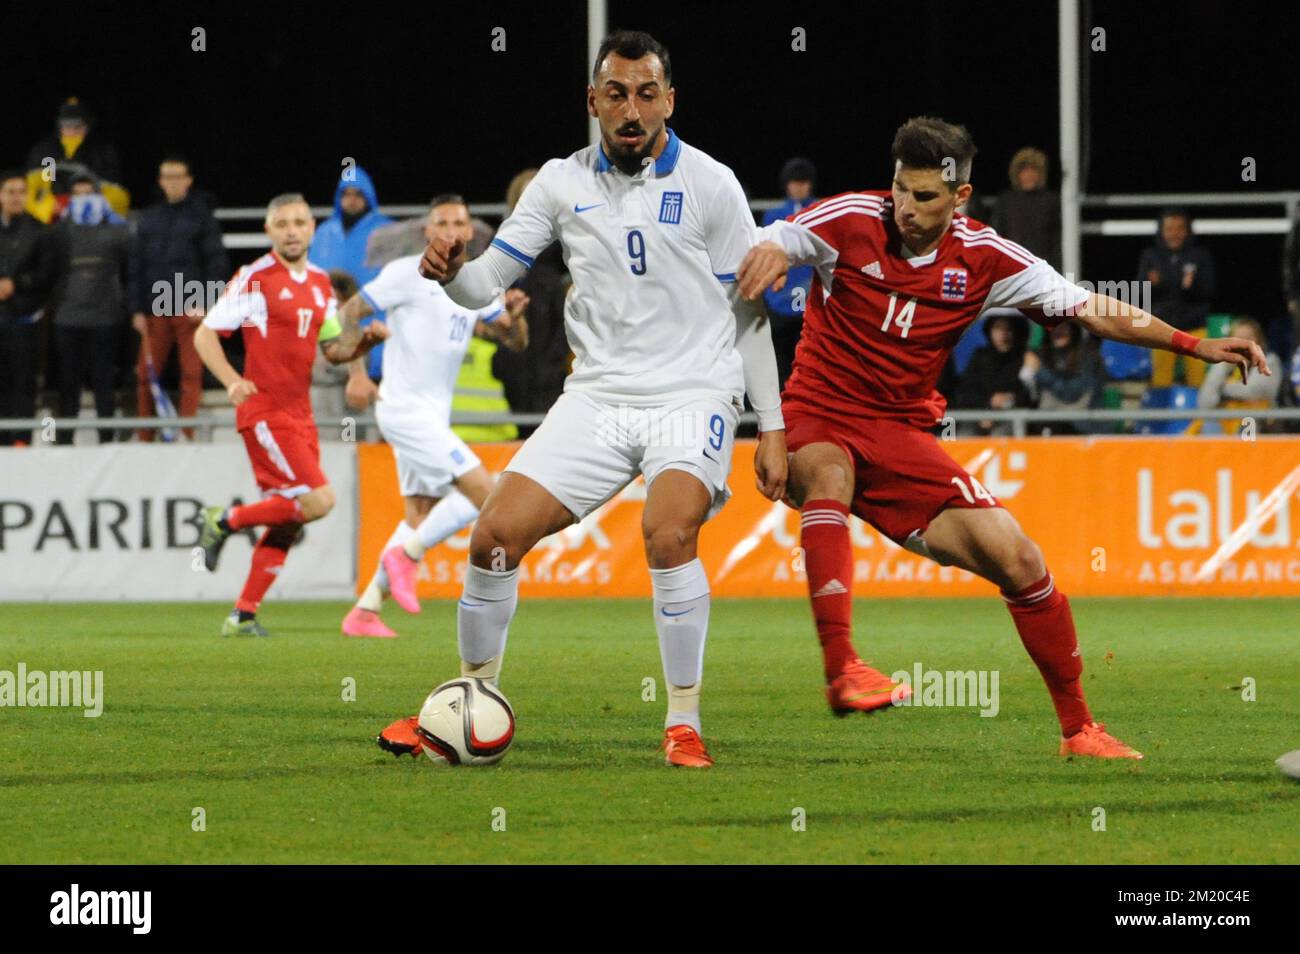 20151113 - DIFFERDANGE, LUXEMBOURG: Greece's Kostas Mitroglou and Luxembourg's Kevin Malget fight for the ball during a friendly soccer game between Luxembourg national team and Greece, in Differdange, Luxembourg, Friday 13 November 2015. BELGA PHOTO SOPHIE KIP Stock Photo